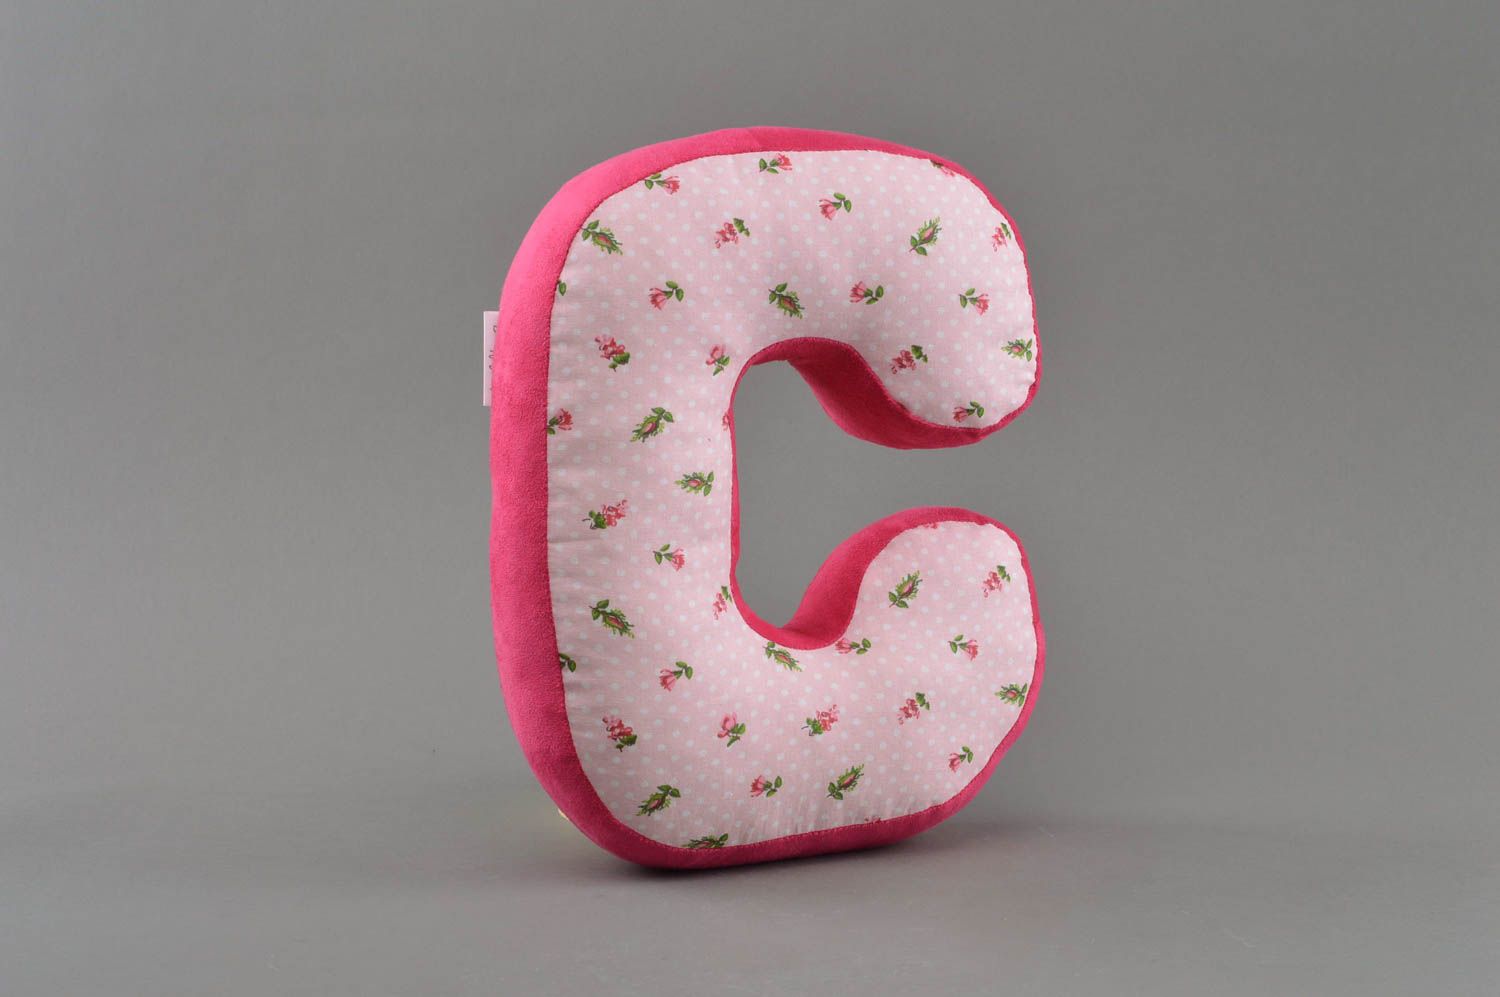 Handmade decorative soft toy letter C sewn of pink and floral patterned fabric photo 1